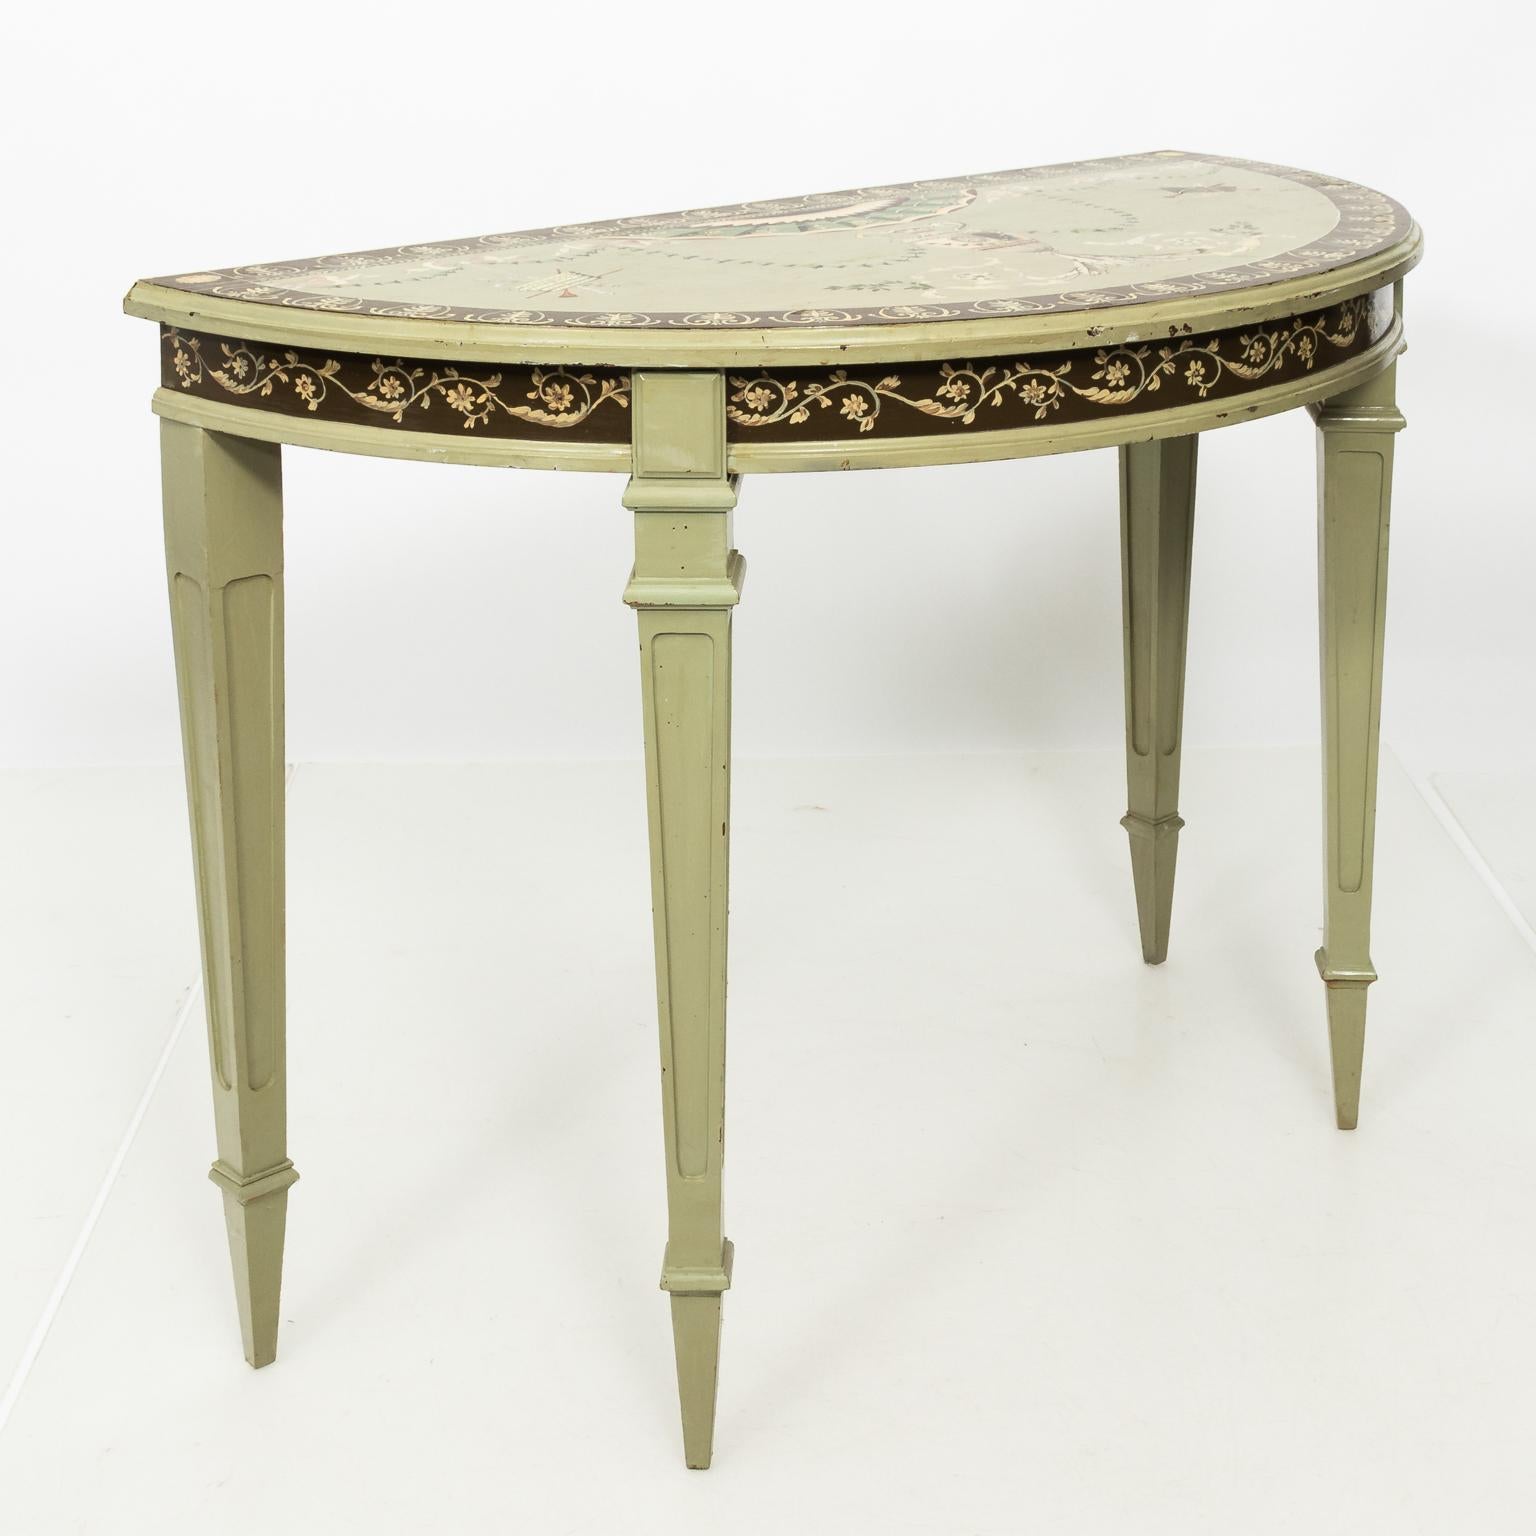 Neoclassical style painted demilune consoles with heavily detailed tabletop featuring delicately painted Adams style urns, Roman swags, palmettes, and painted musical instruments, circa 1930s. The skirt also features scrolled floral trim on tapered